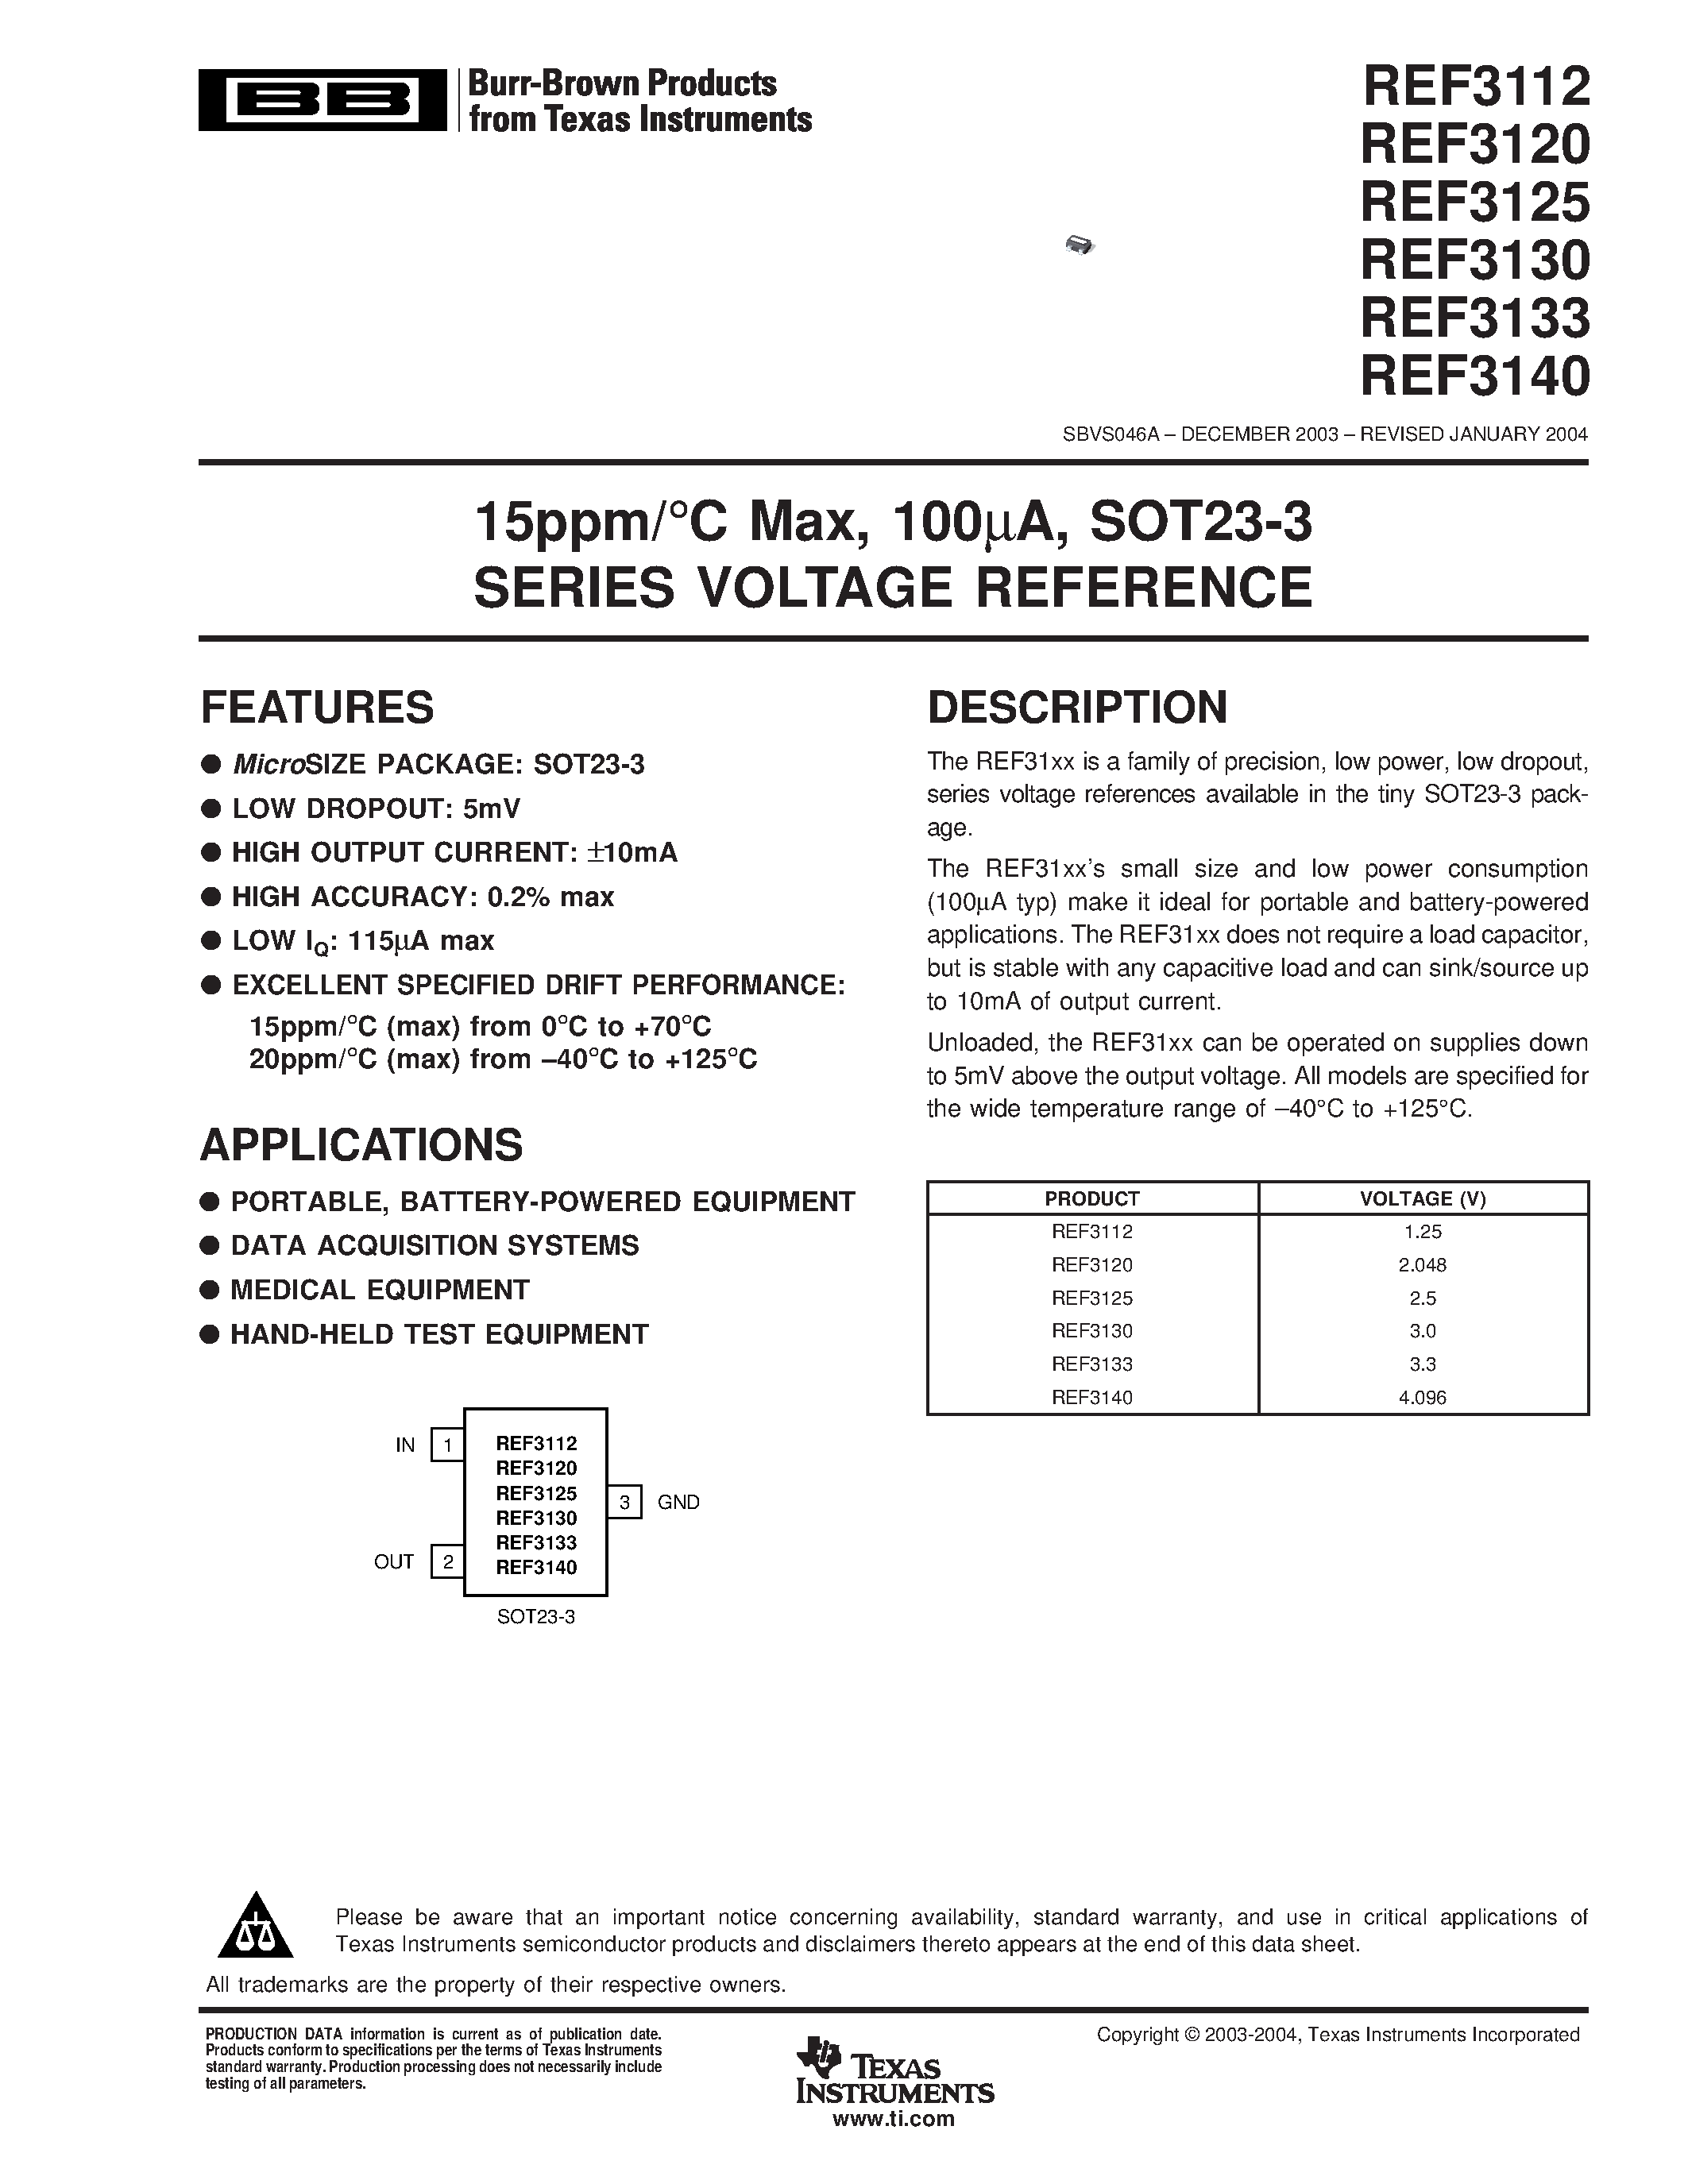 Даташит REF3112AIDBZT - 15ppm/C Max/ 100UA/ SOT23-3 SERIES VOLTAGE REFERENCE страница 1